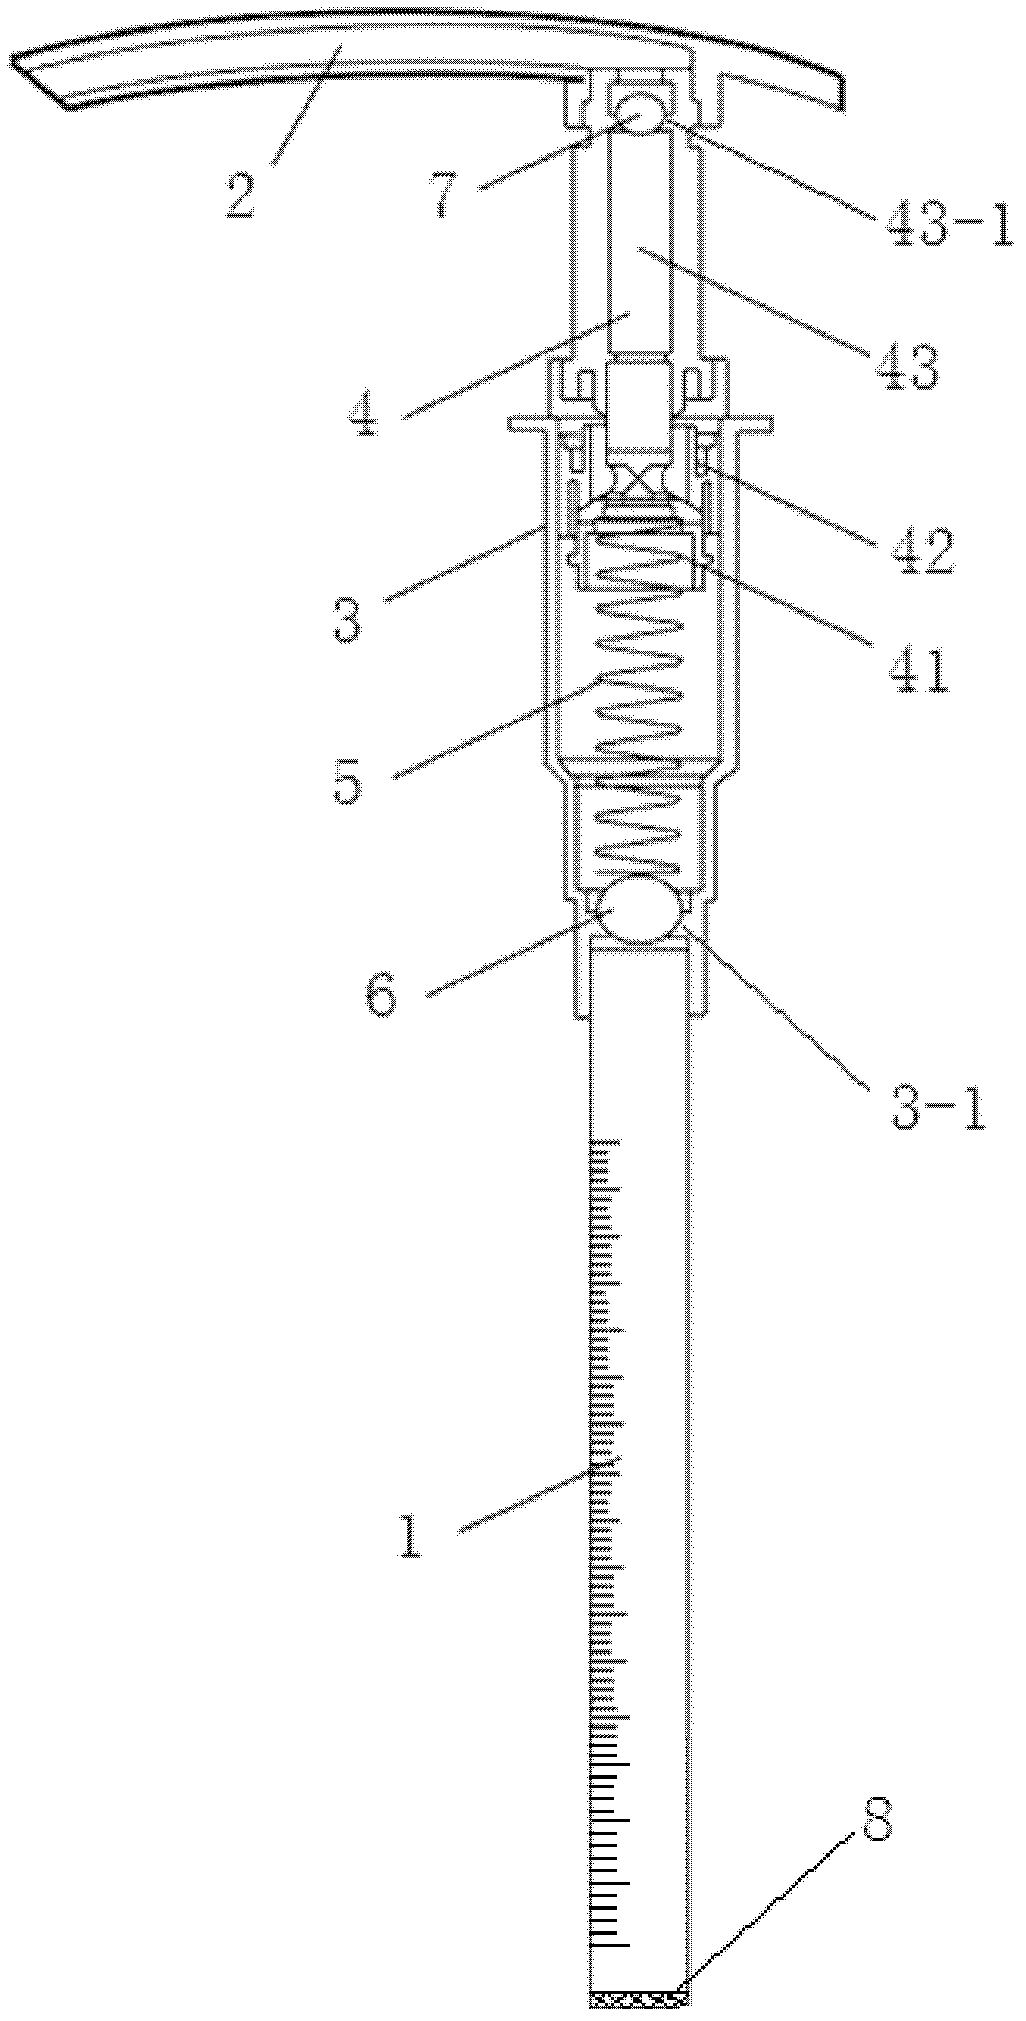 In-situ continuous sampling device for water sample in wetland